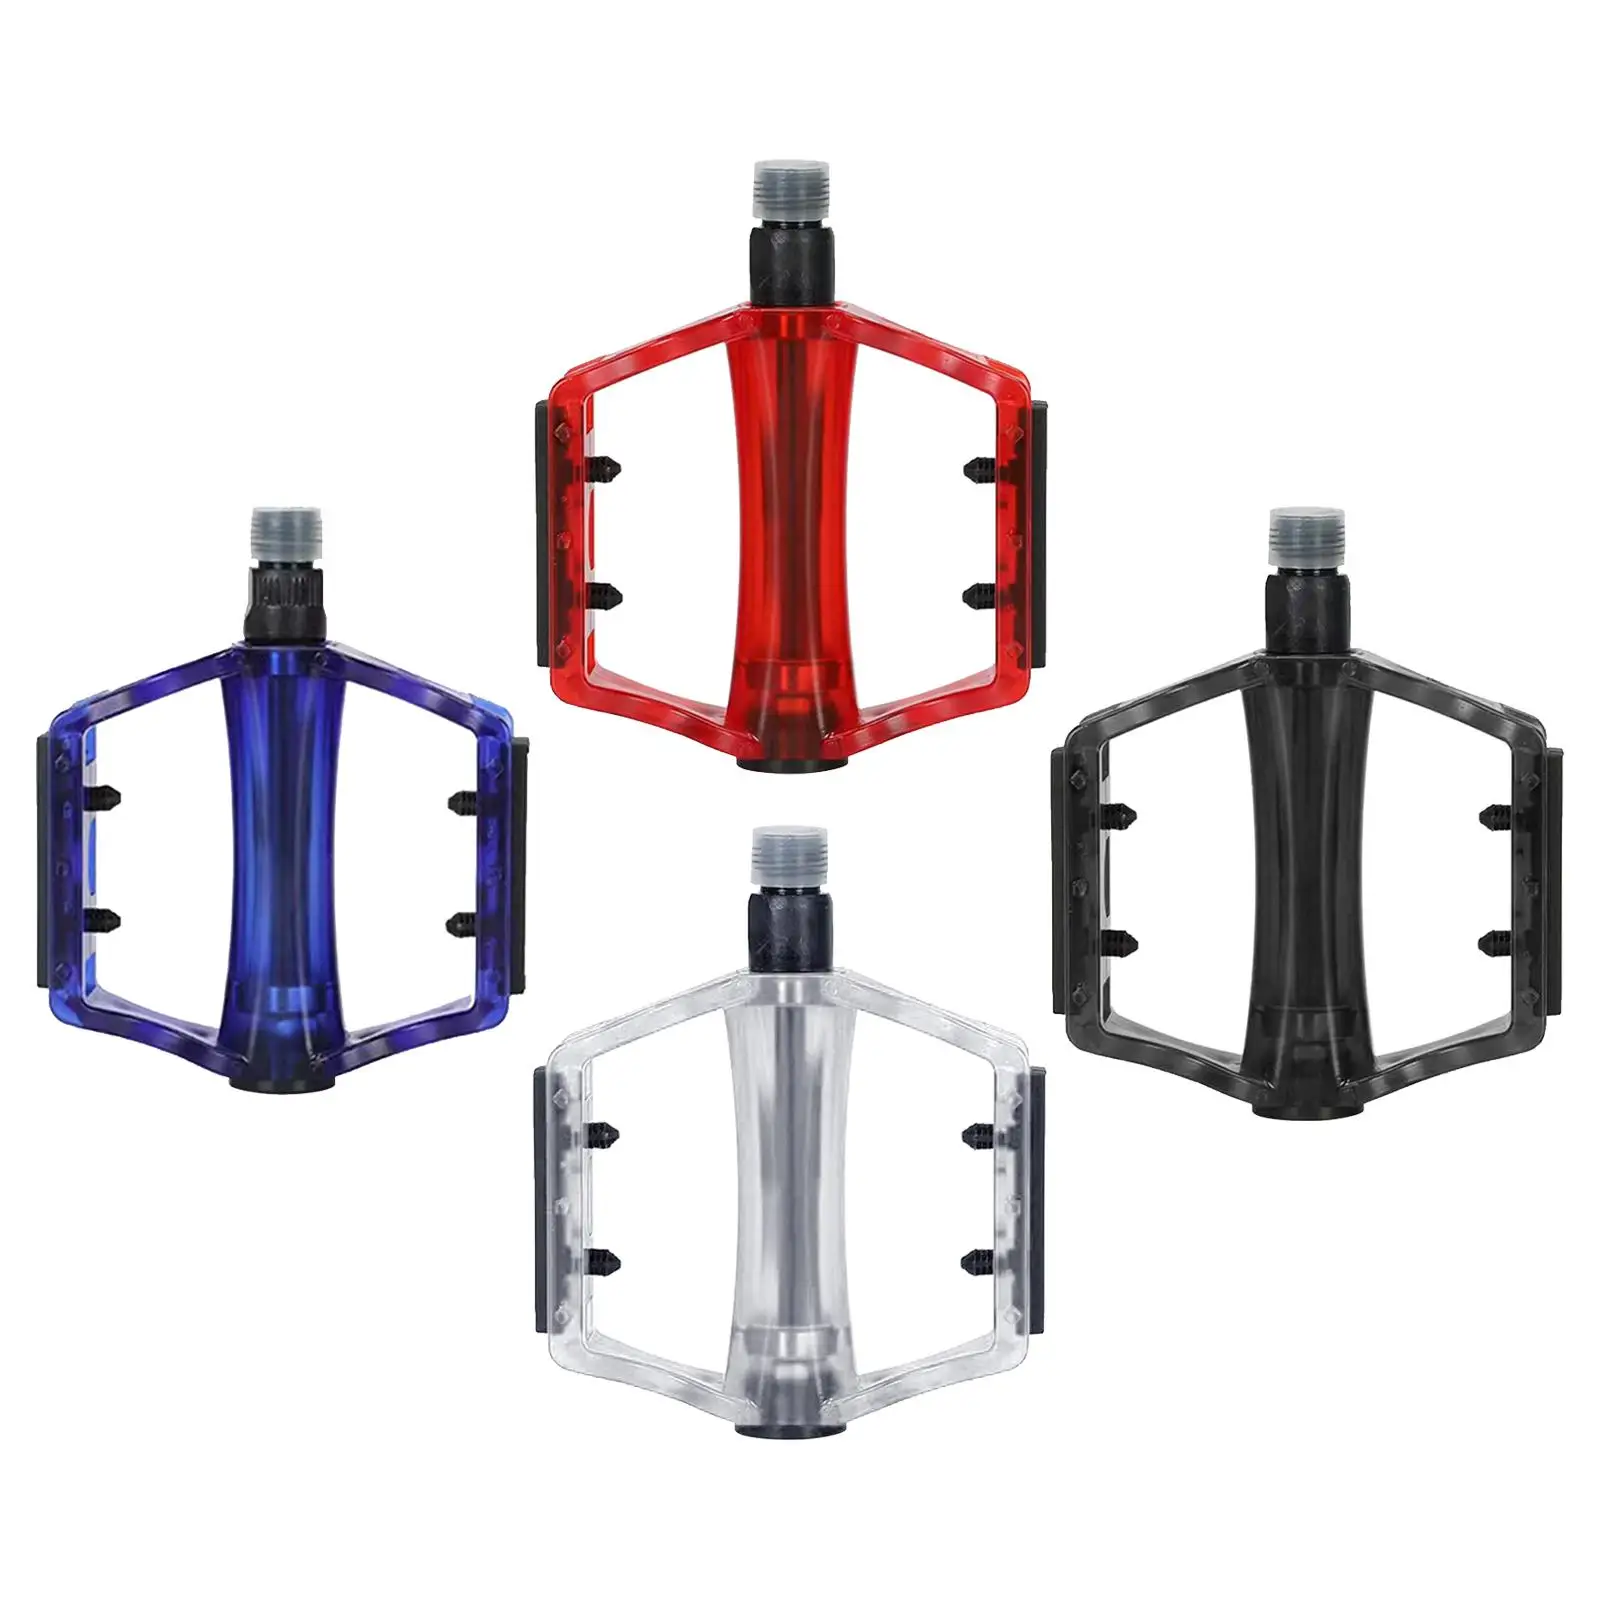 2Pcs Bike Pedals Bicycle Pedals Universal Lightweight Cycling Pedals Parts for Road Bike Mountain Bike Adult Bikes Equipment